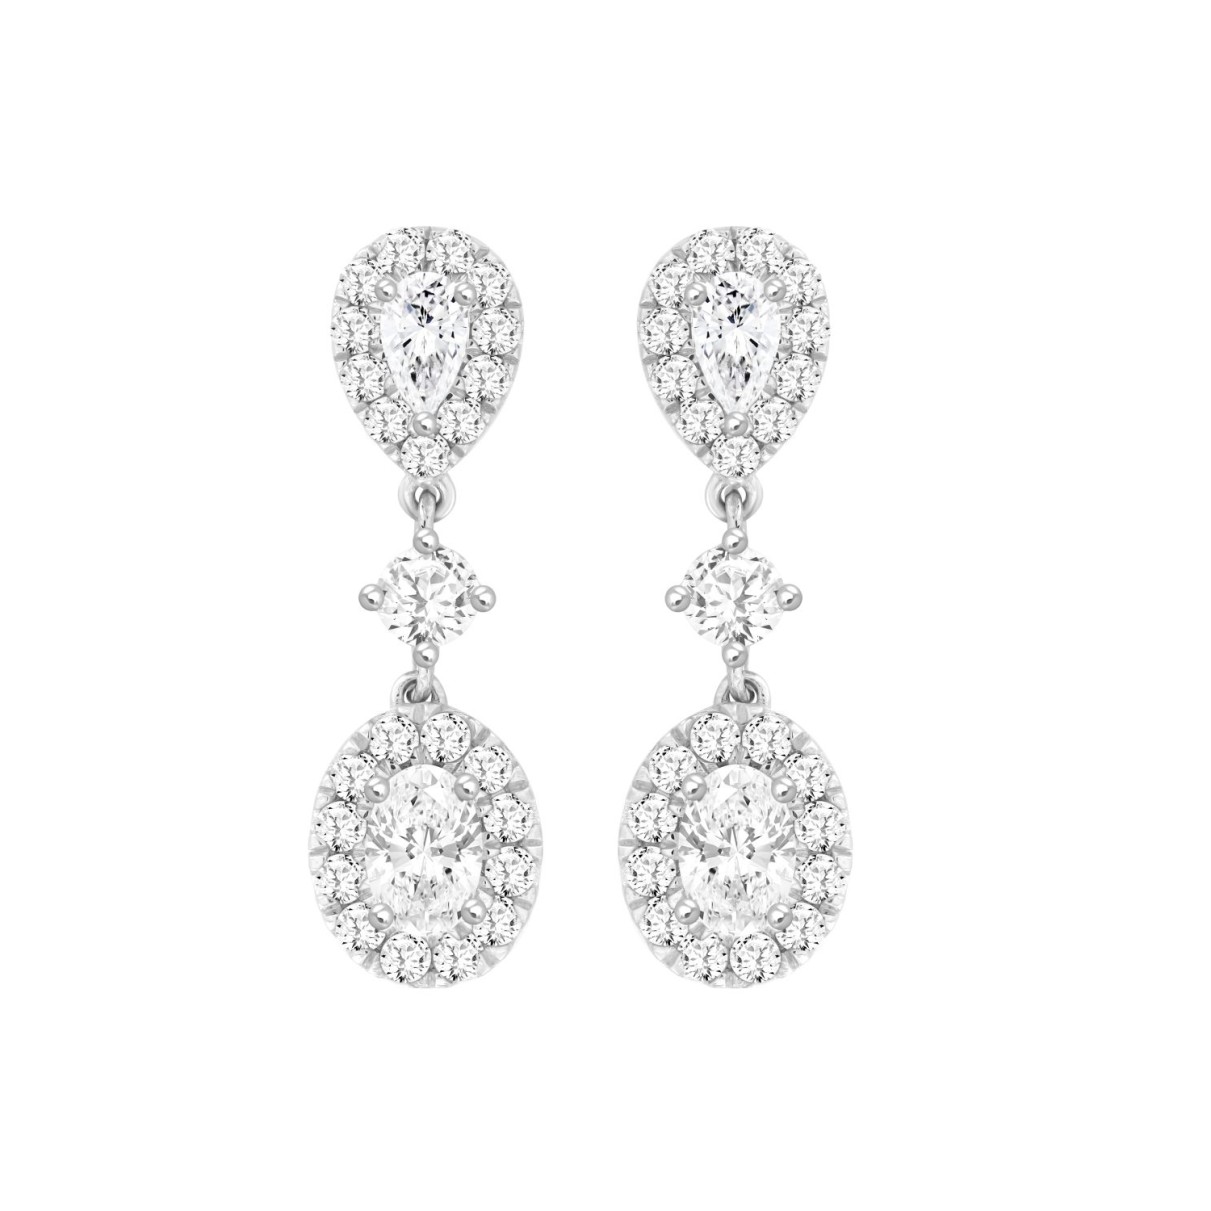 LADIES  EARRINGS 2 3/4CT ROUND/OVAL/PEAR DIAMOND 14K WHITE GOLD